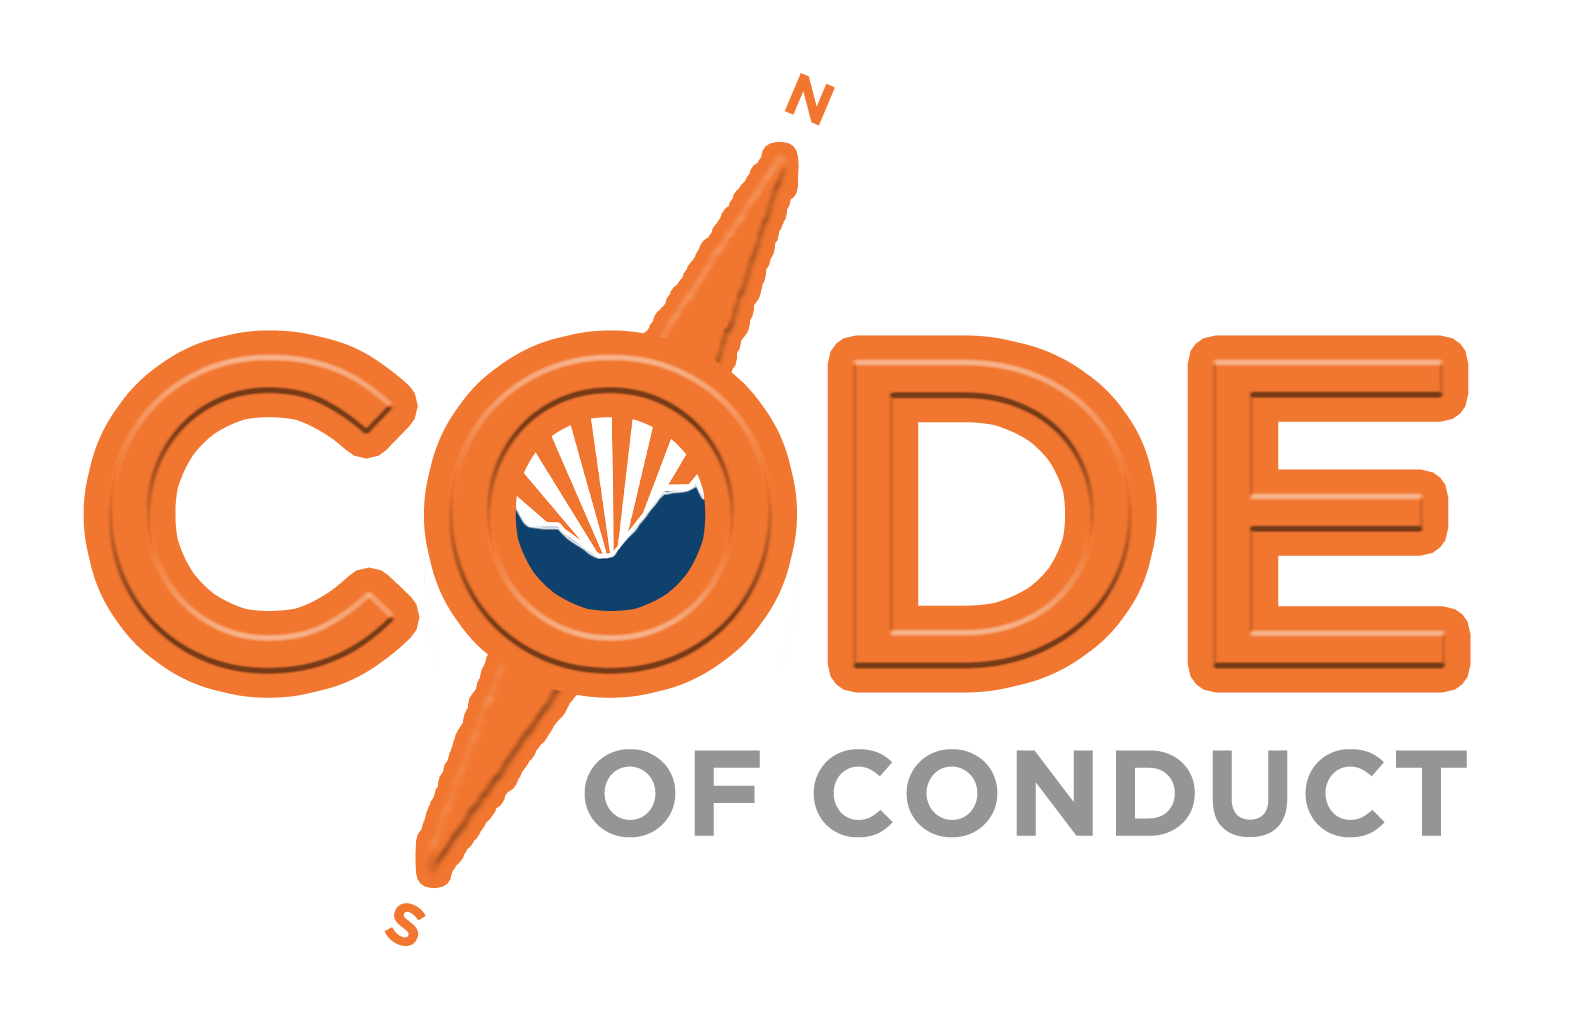 text: code of conduct